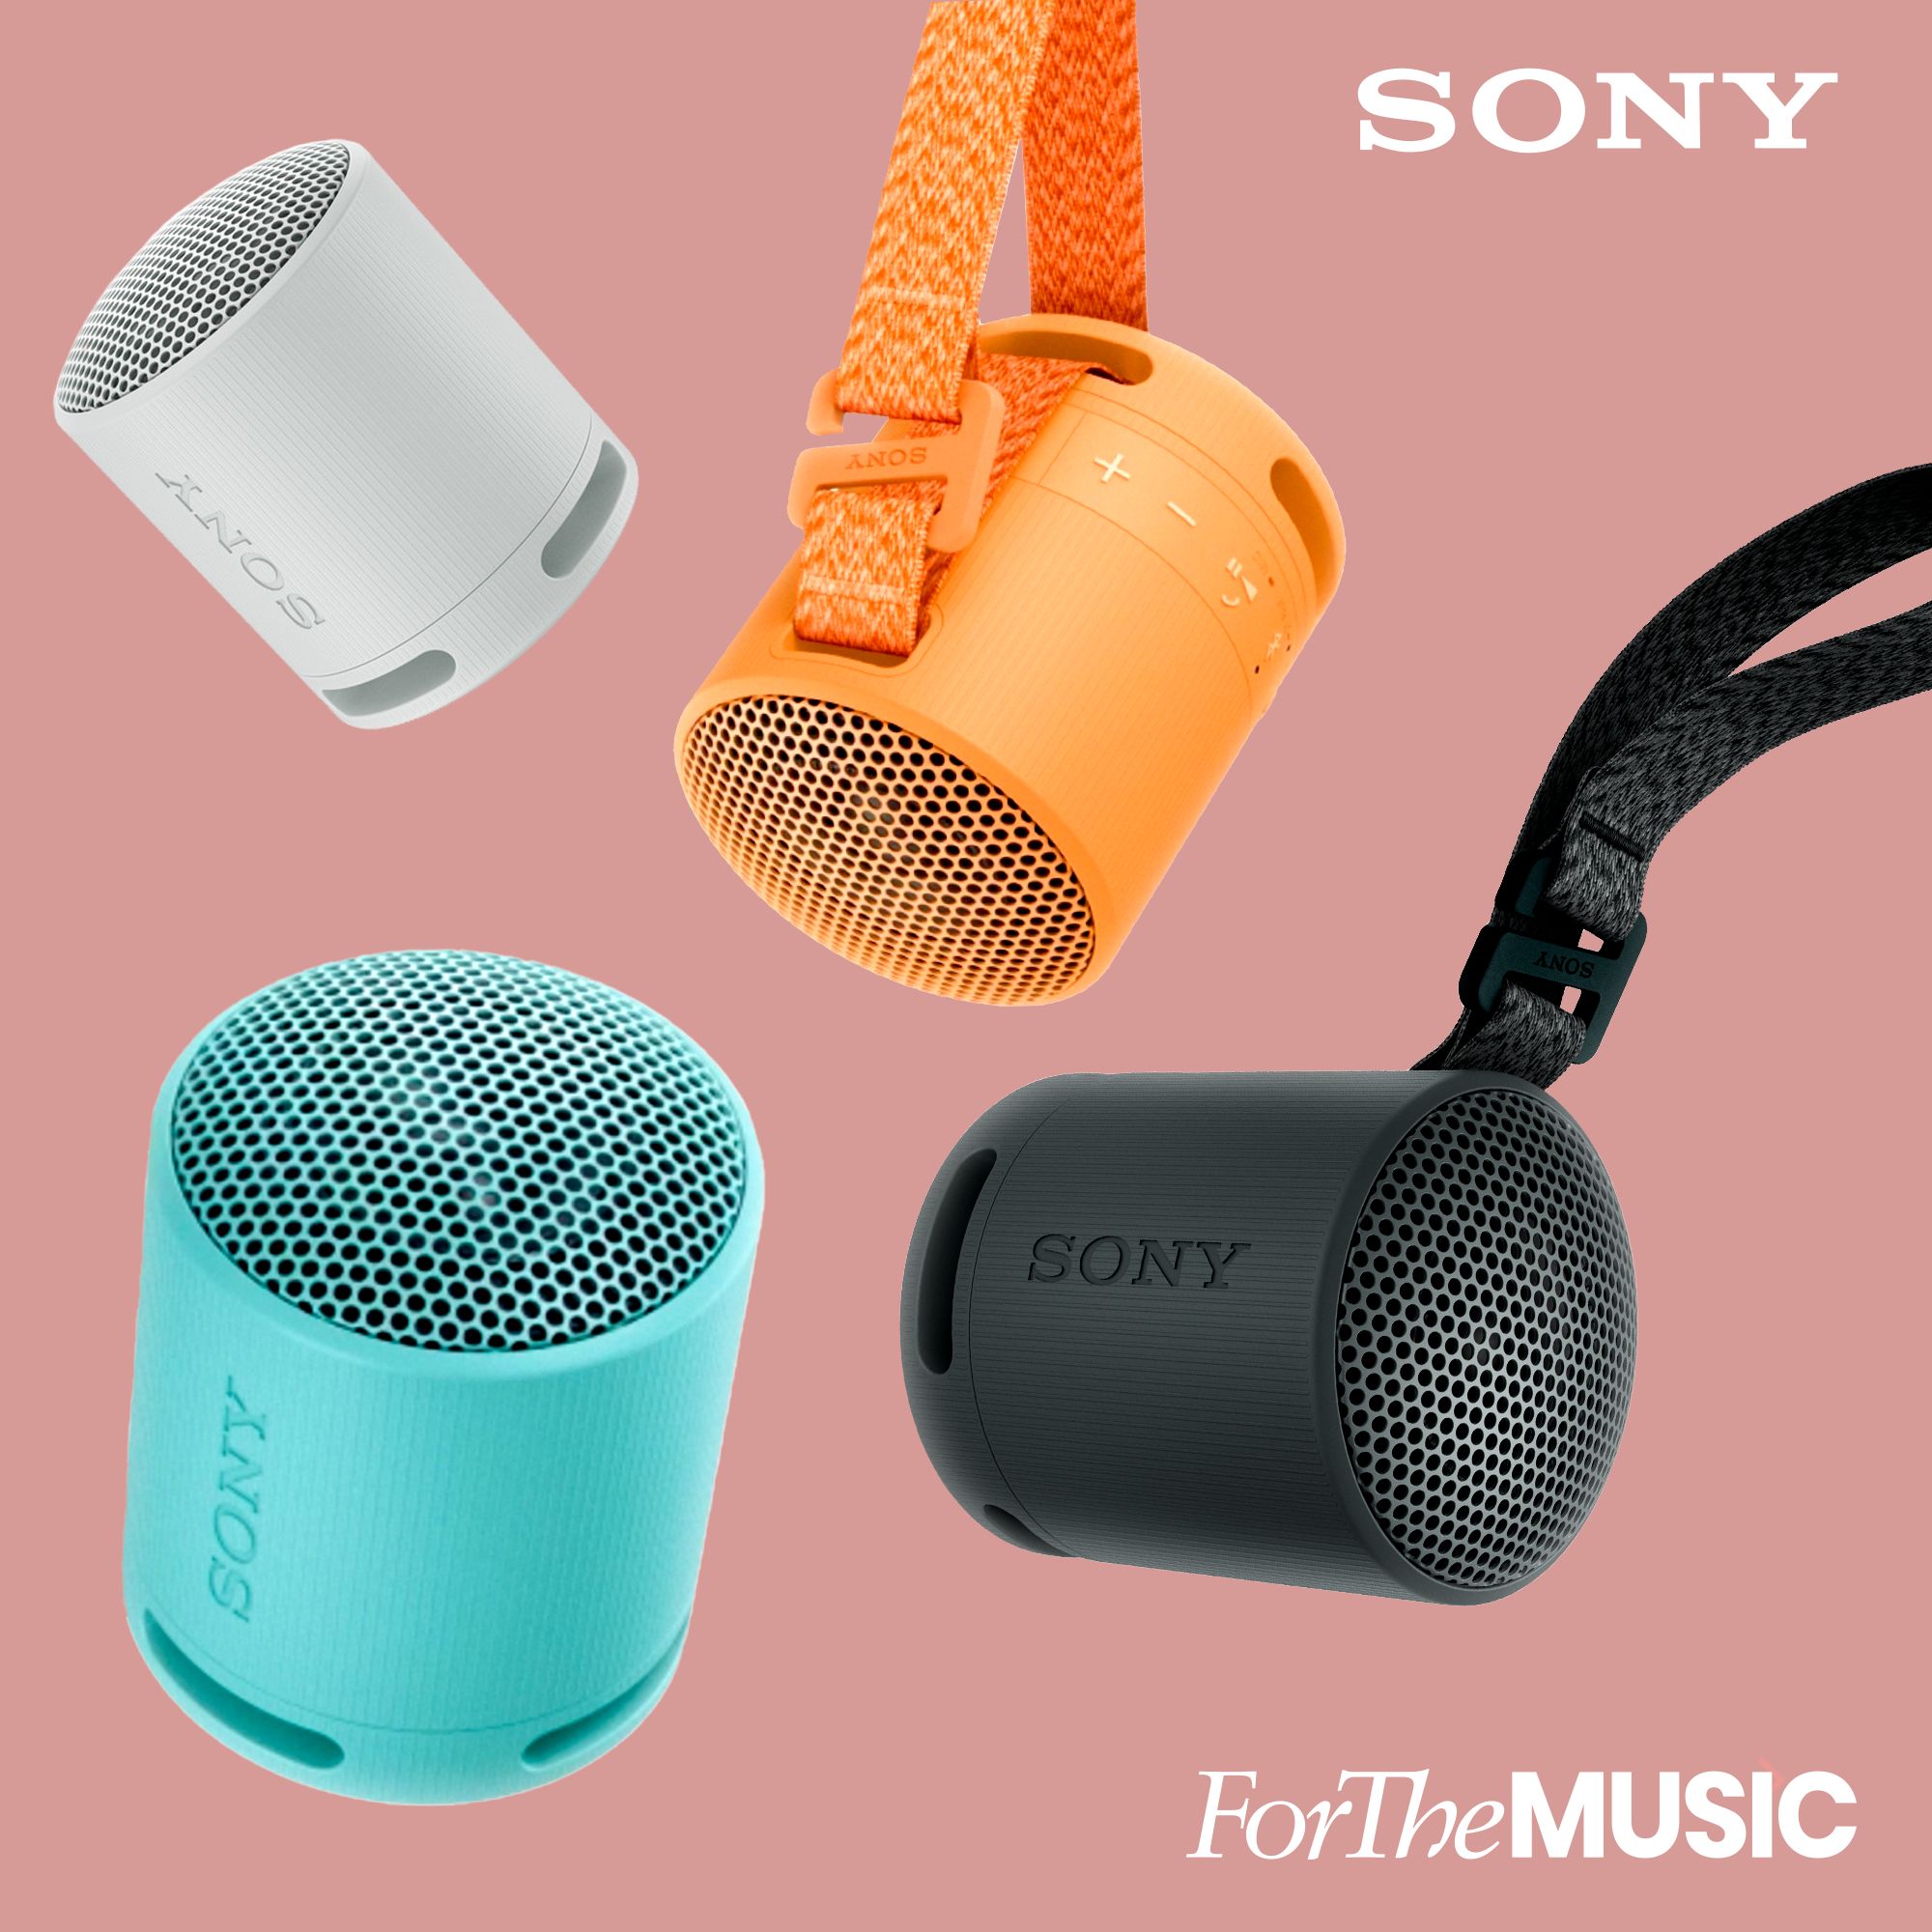 Sony Speakers on a pink background